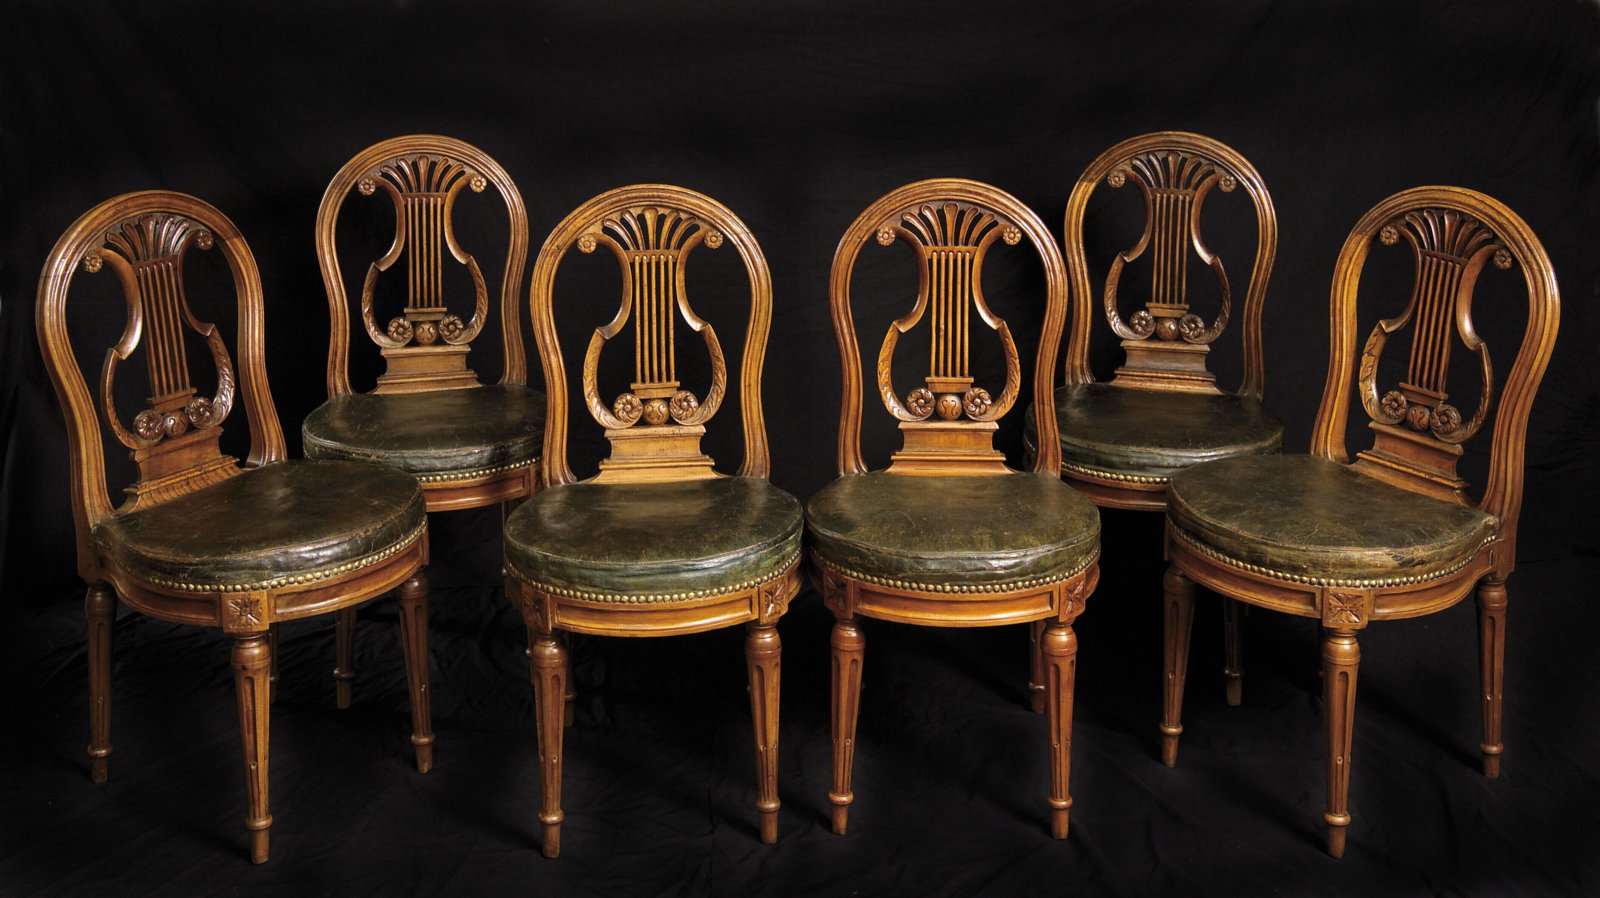 Suite of Four French Louis XVI Period, Walnut Chairs Stamped, “J. CHENEAUX”